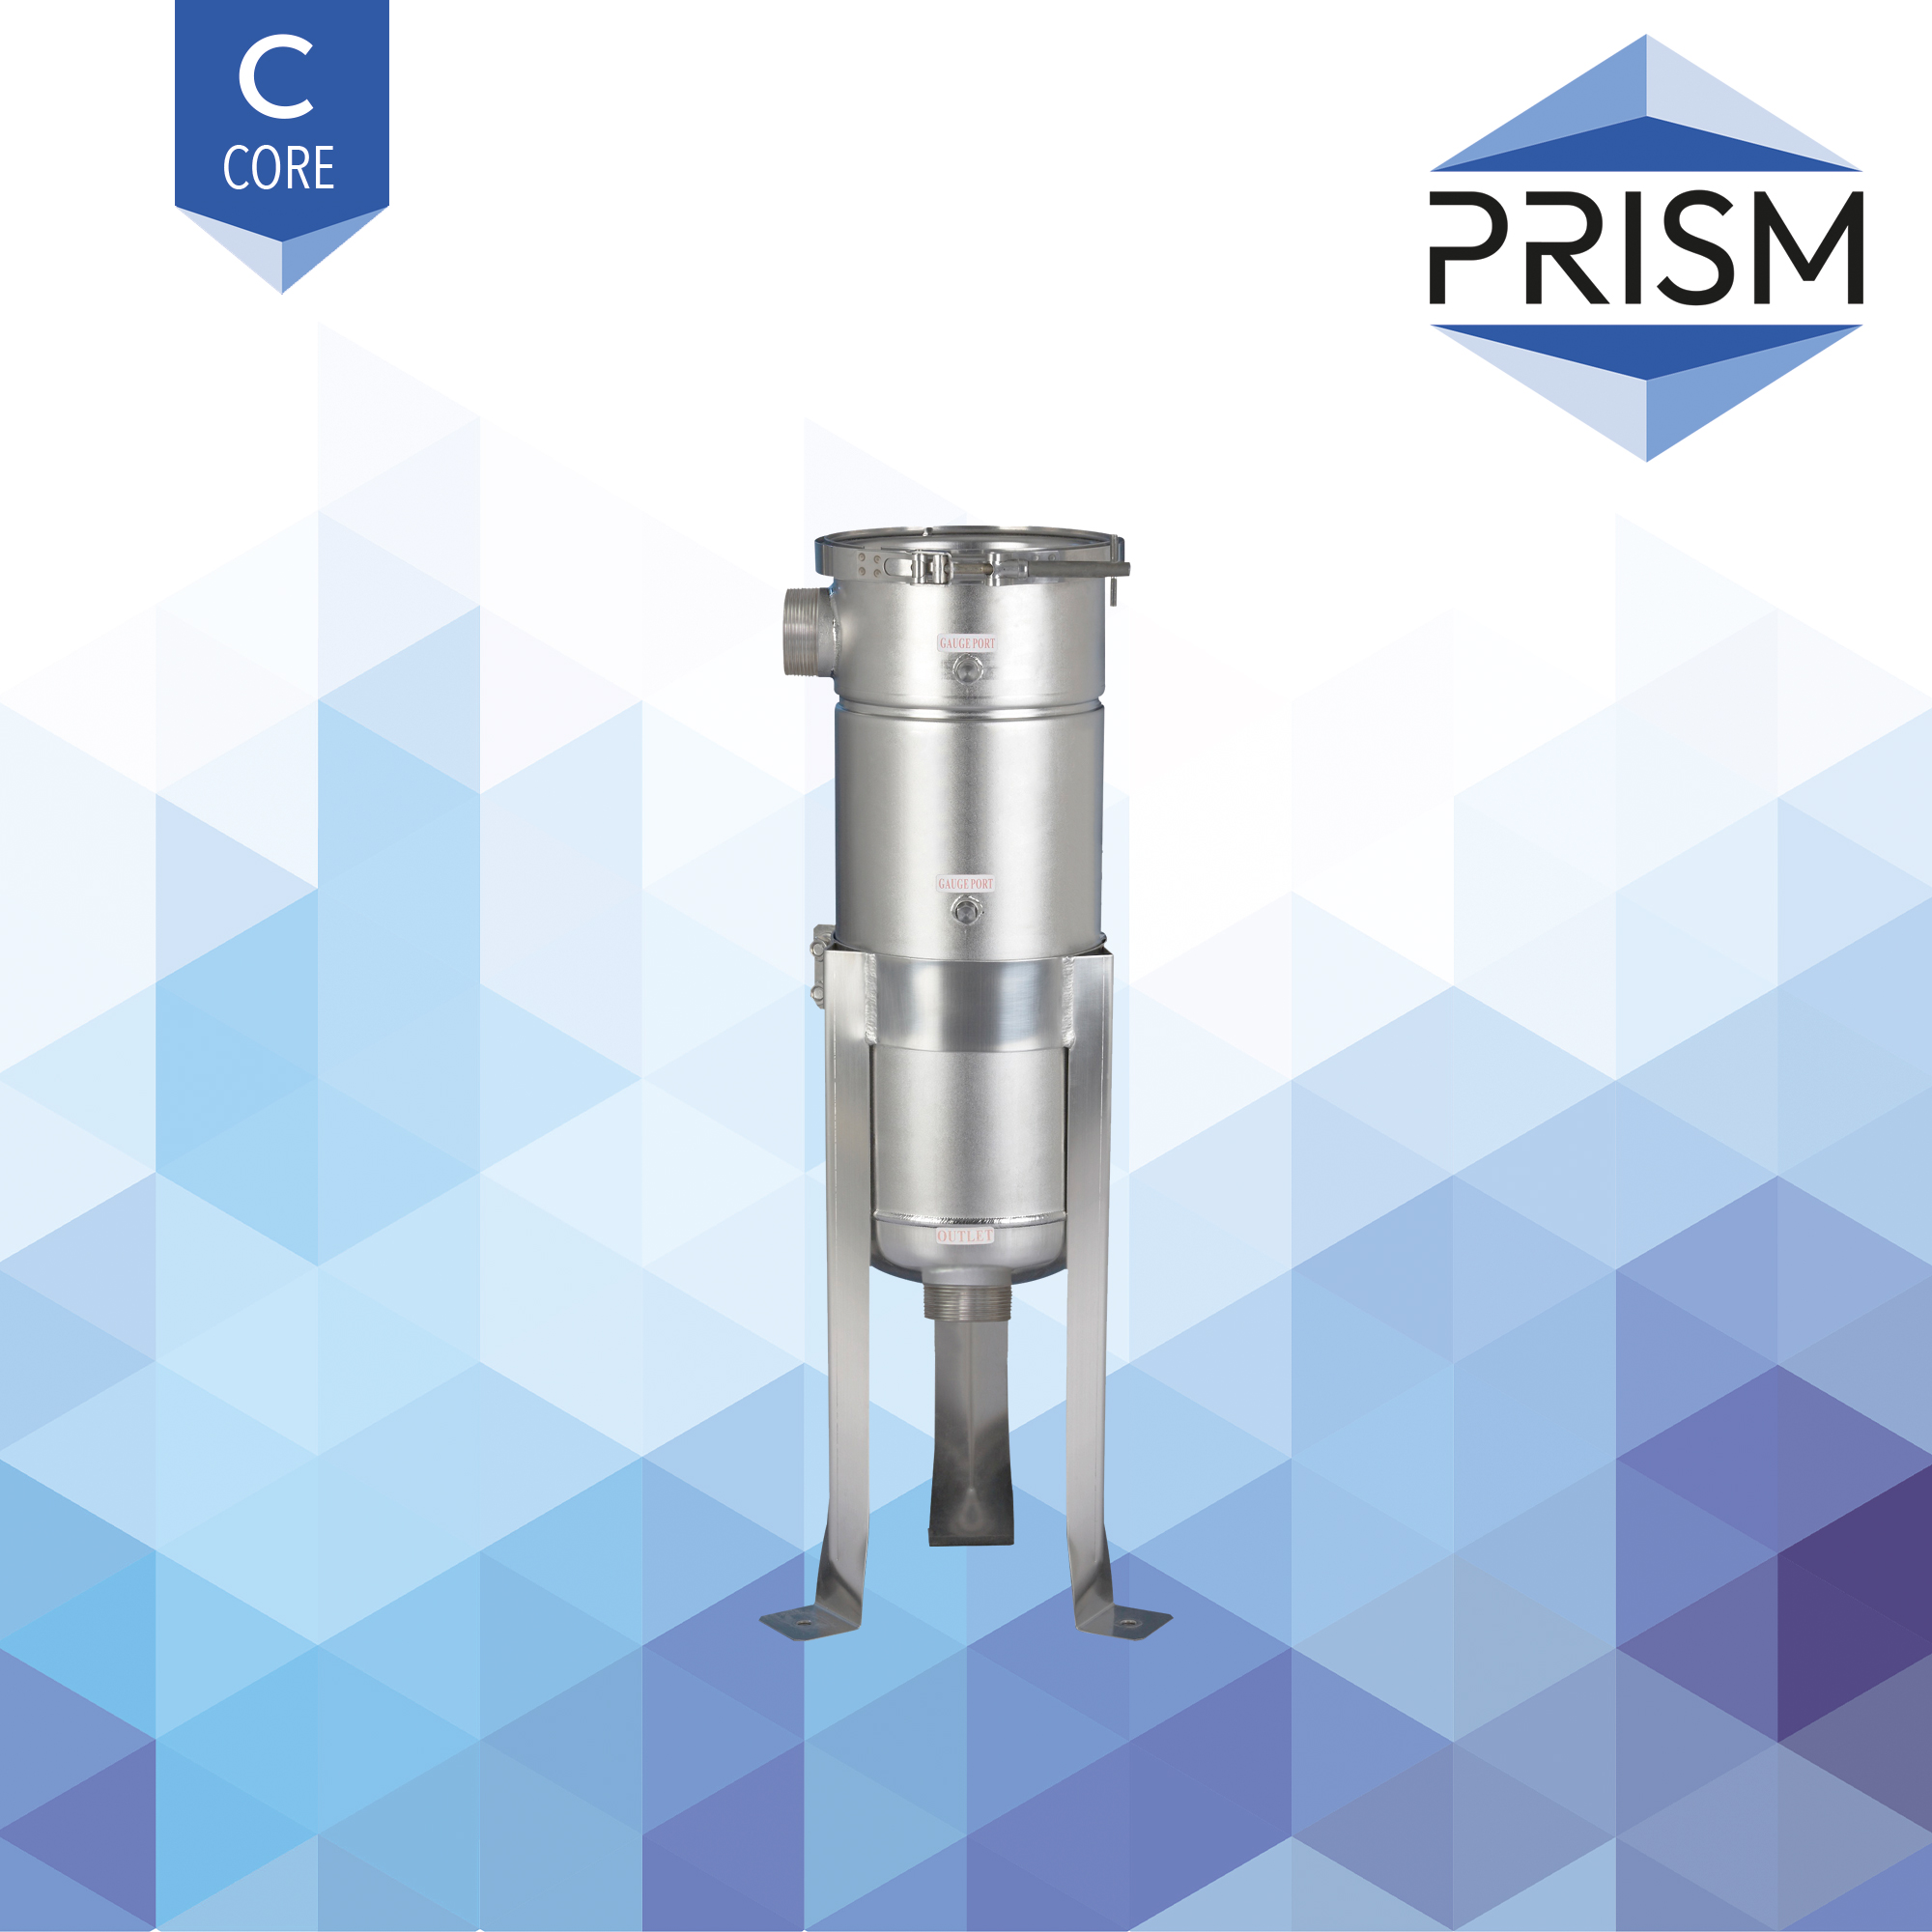 BH-SS-4x9-11/2-B-C    PRISM CORE RANGE :  Bag Housing Stainless Steel 1 Round Size 3 1.5